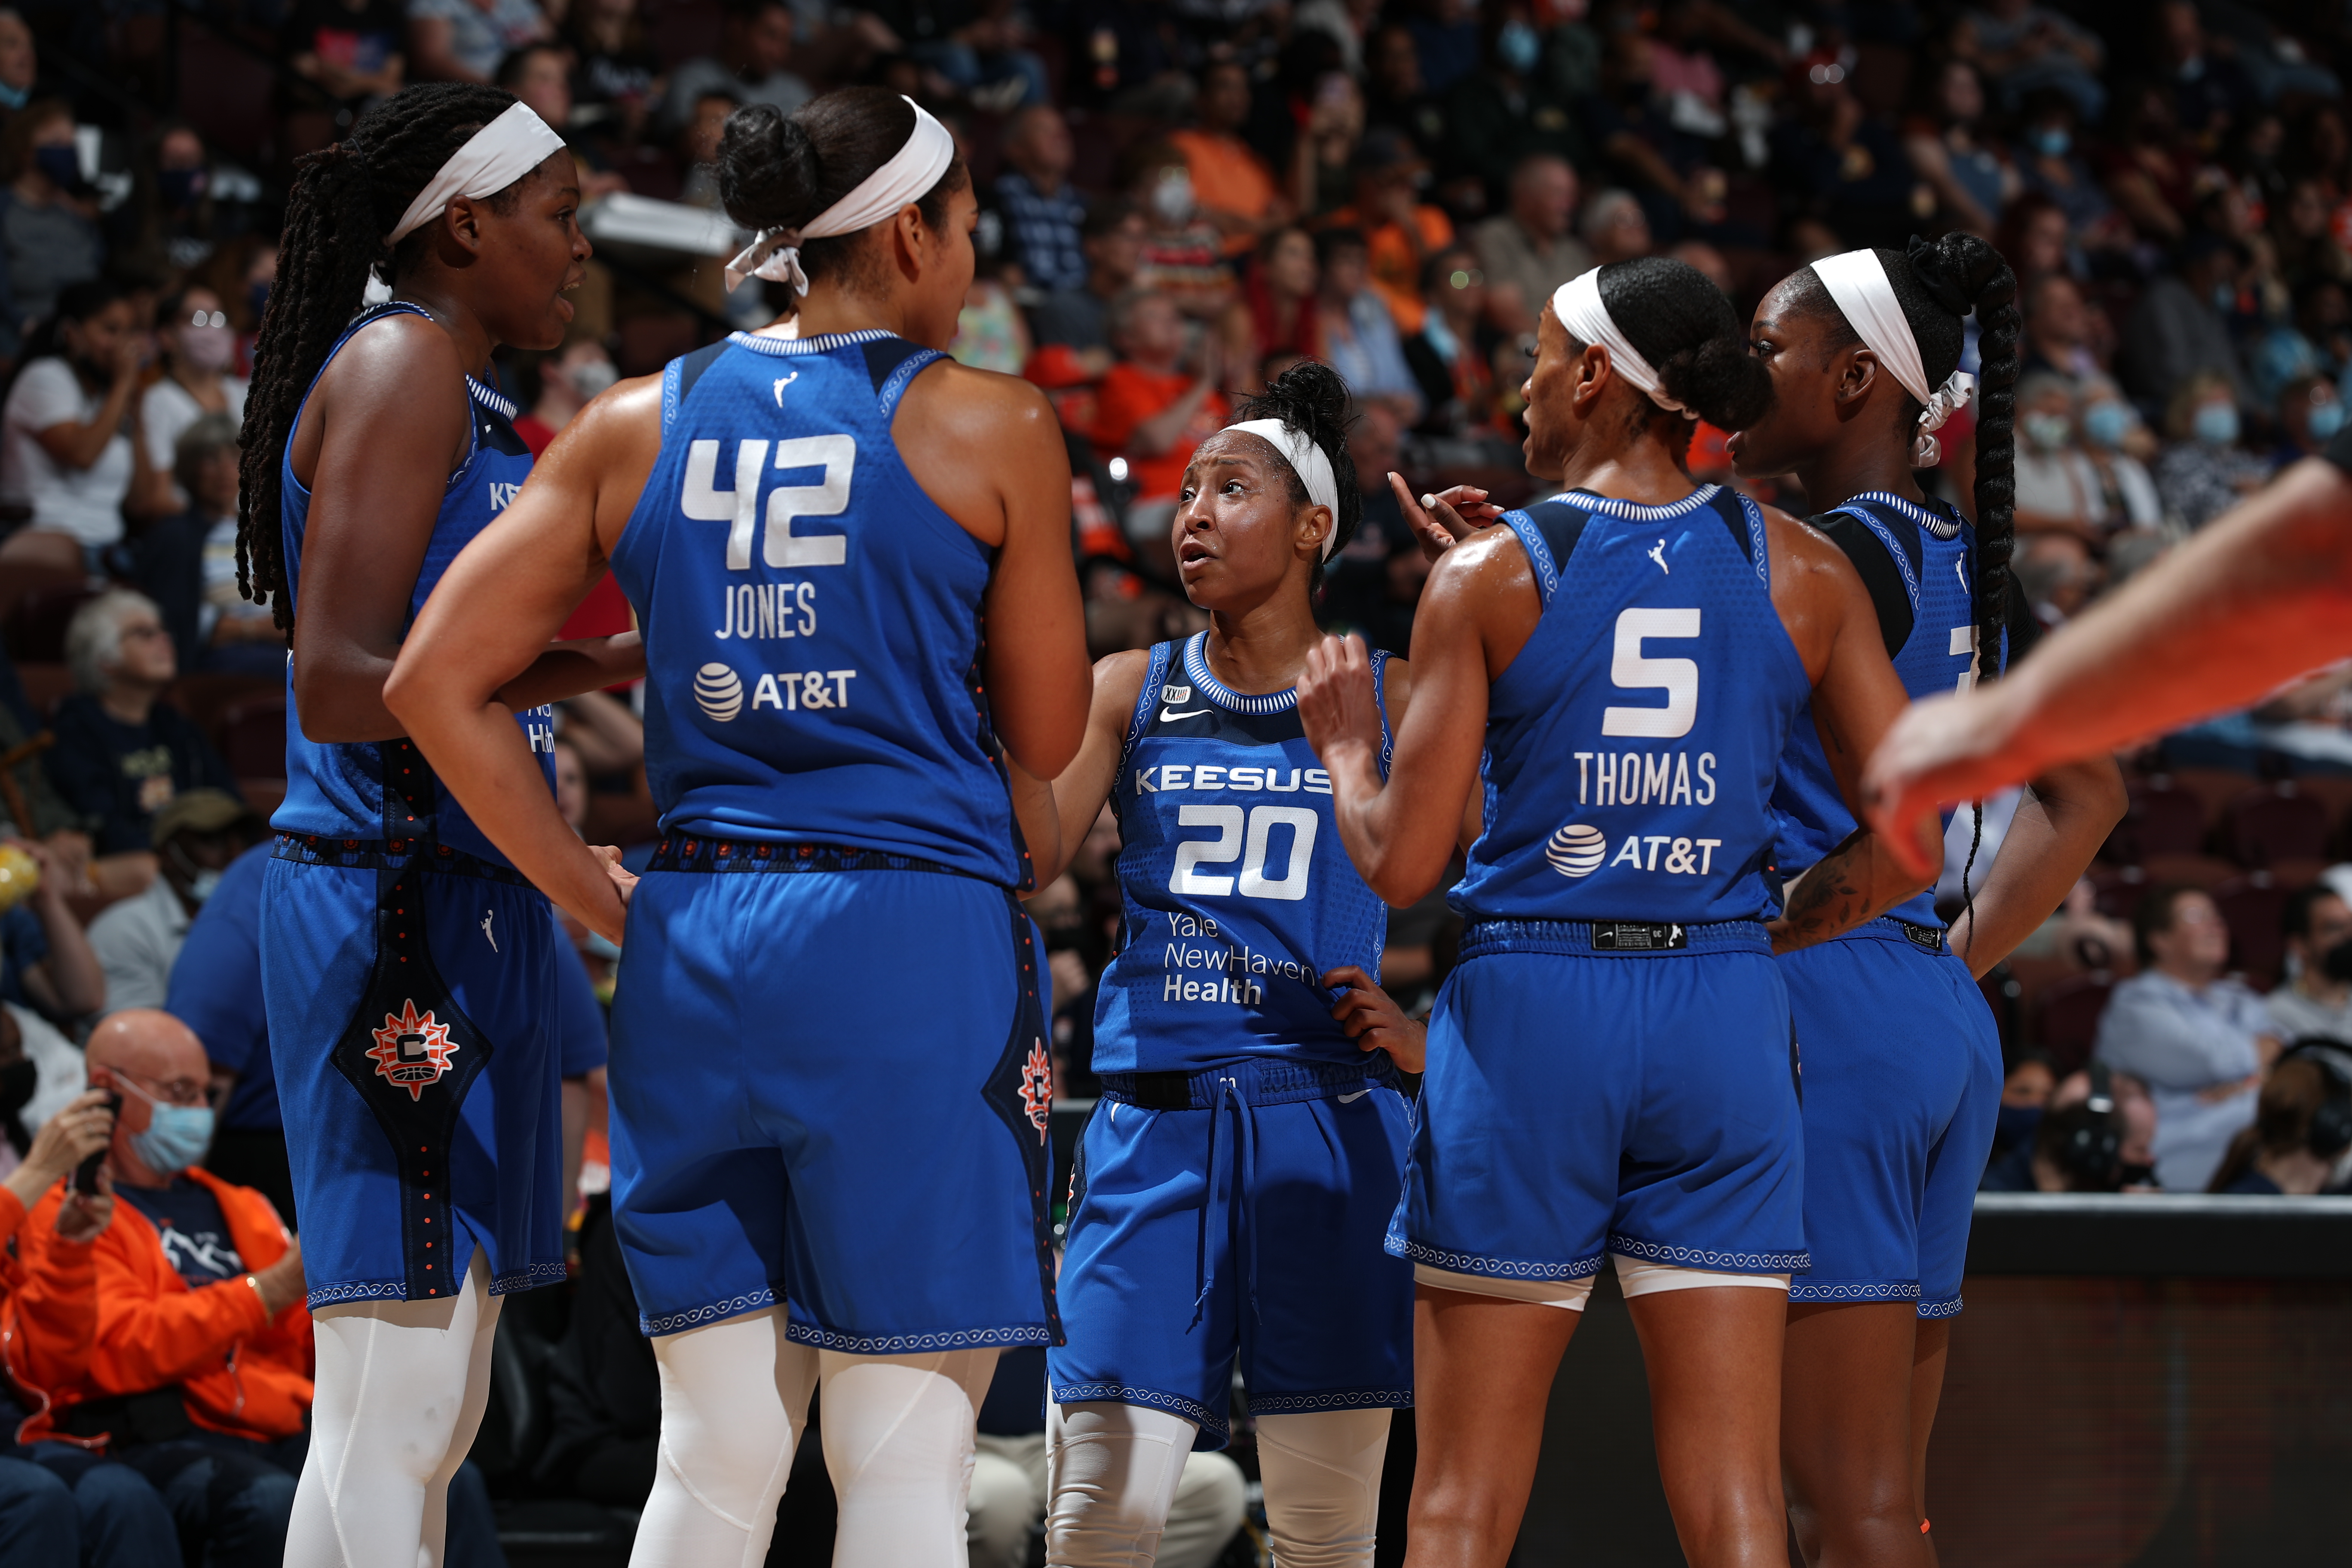 The Connecticut Sun huddle up during the game against the Atlanta Dream on September 19, 2021 at the Mohegan Sun Arena in Uncasville, Connecticut.